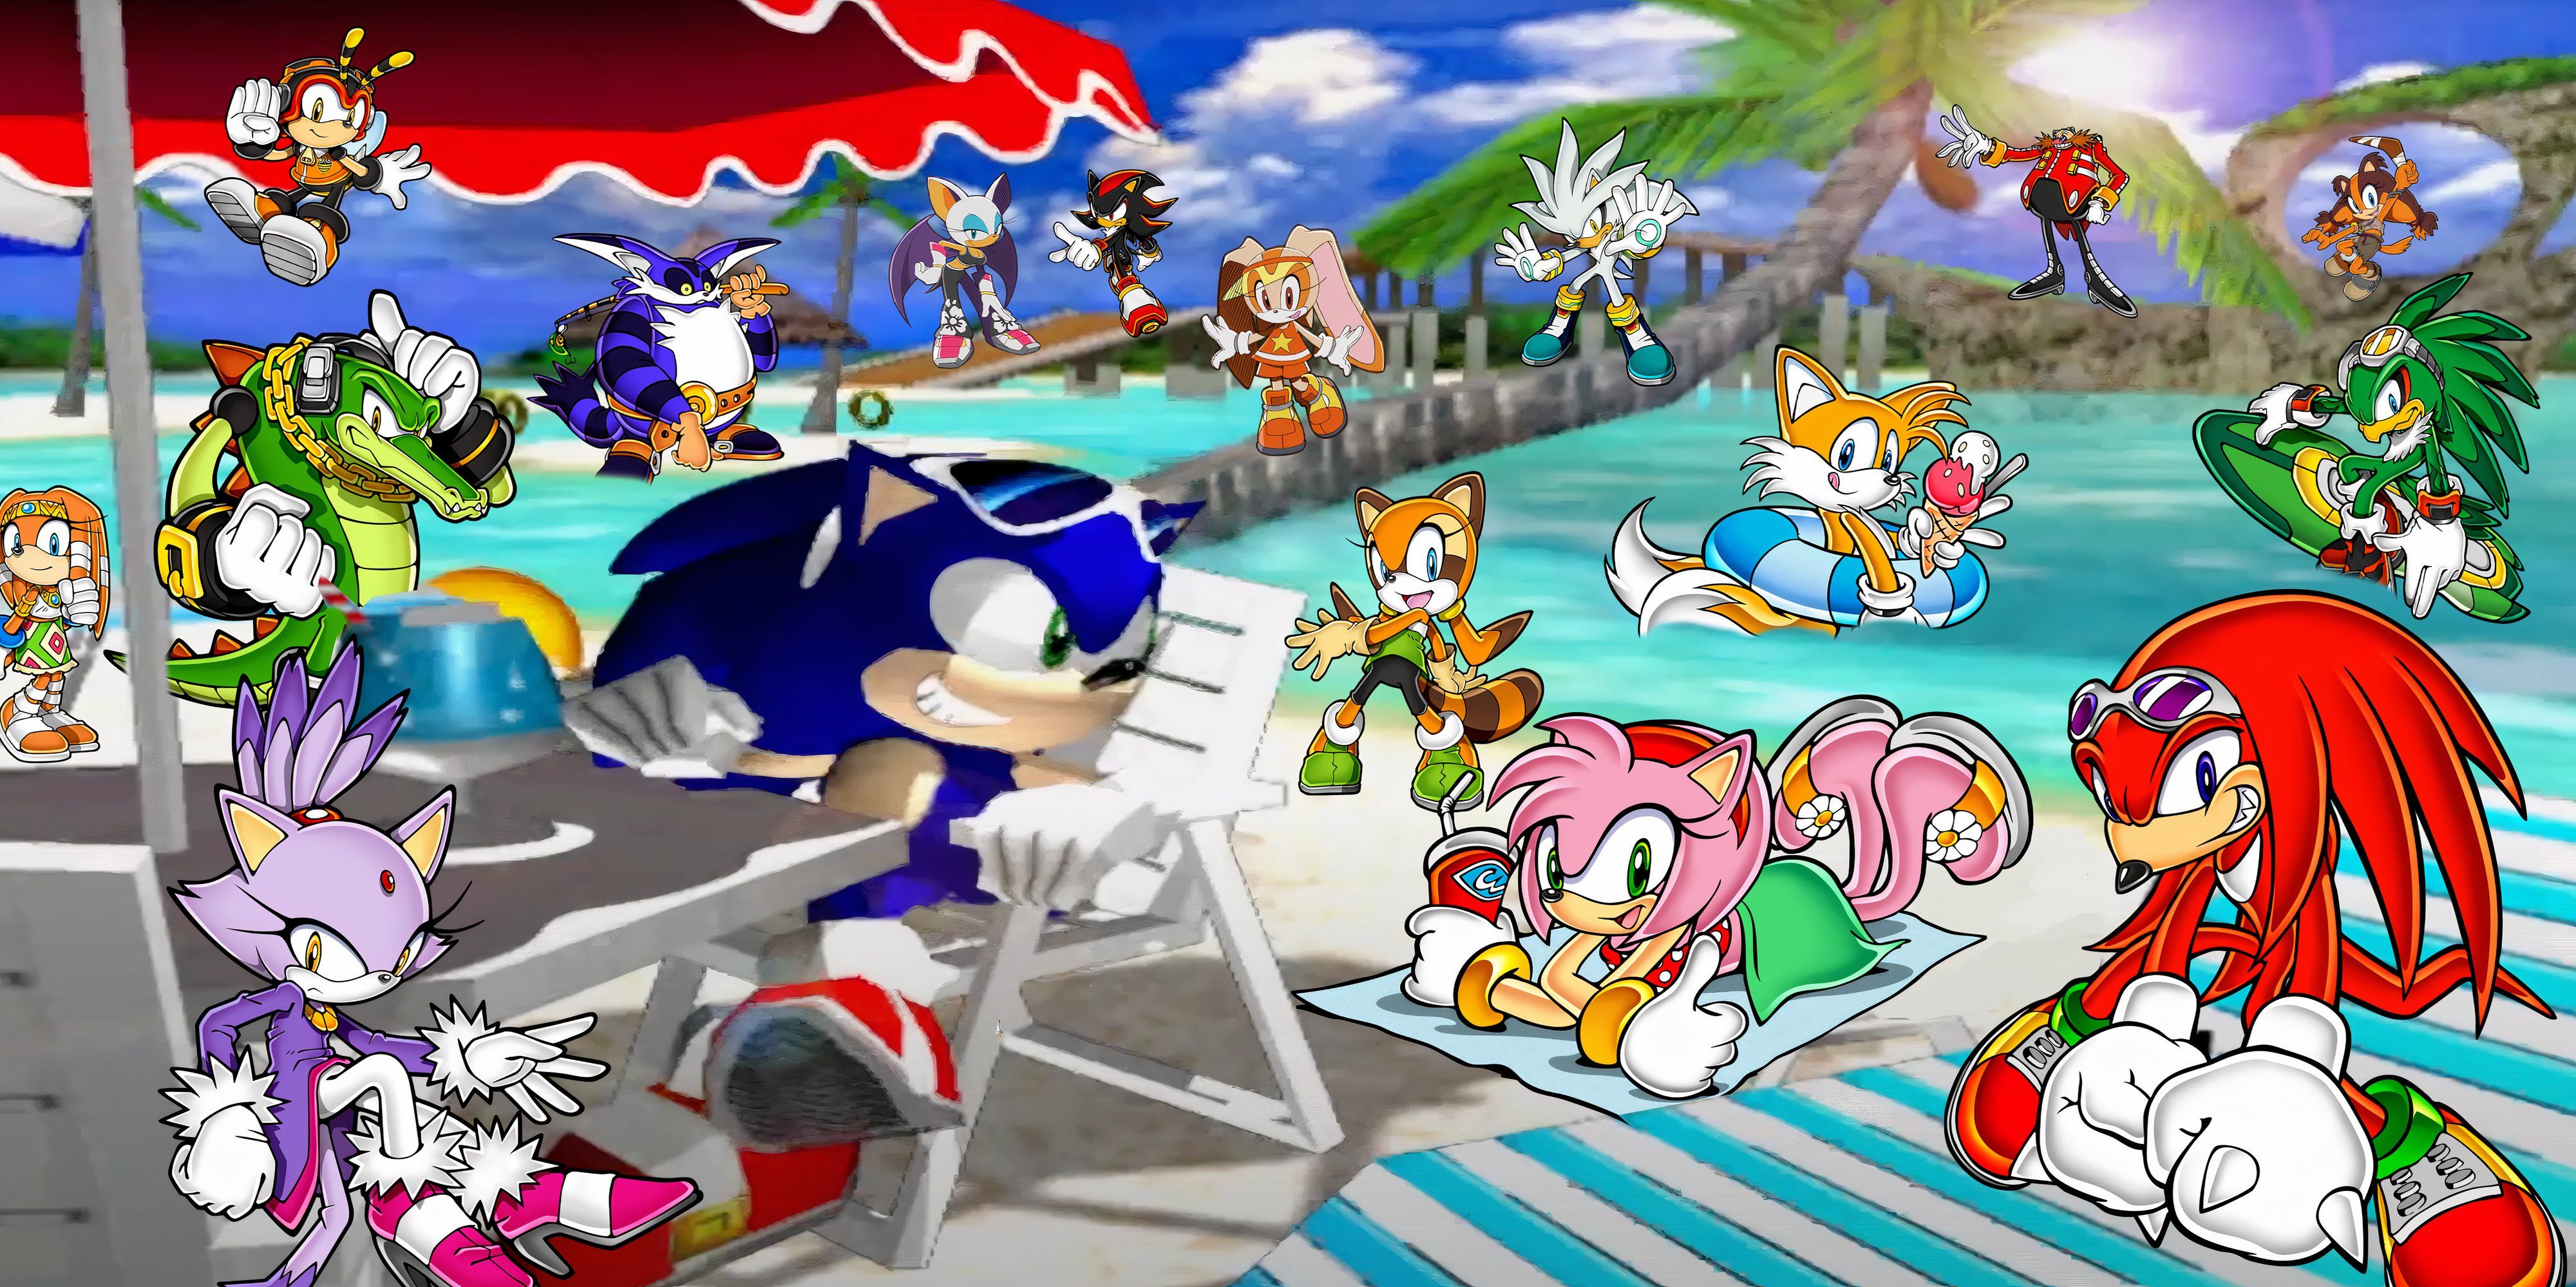 The ending image from Sonic's story in Sonic Adventure, with multiple Sonic characters spaced around in it.